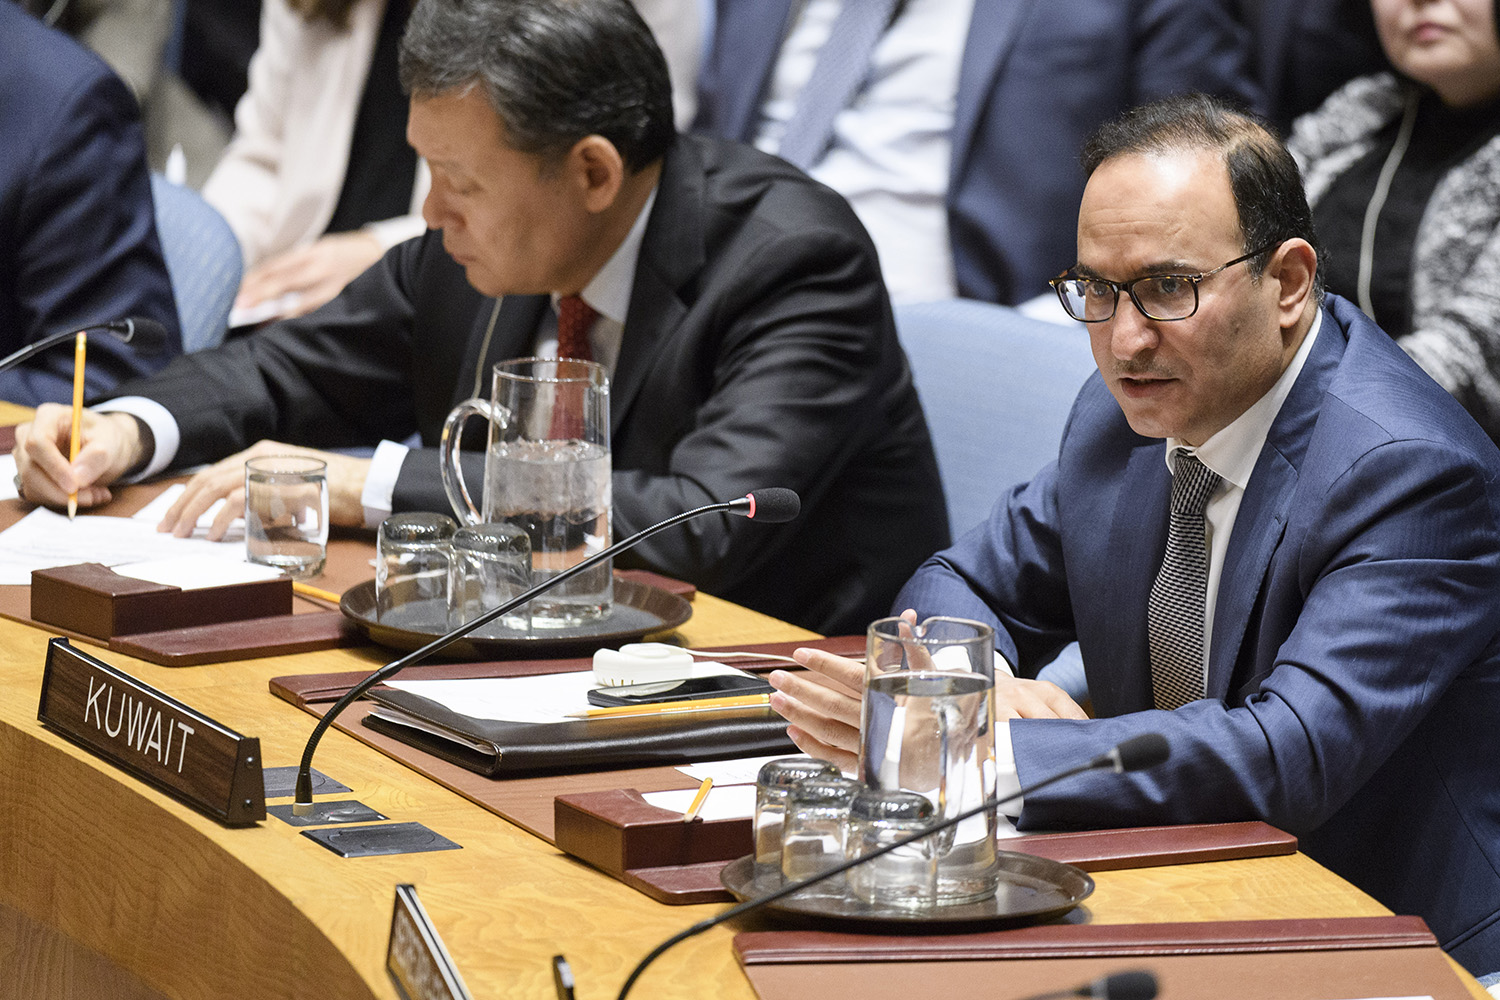 Permanent Representative of Kuwait to the United Nations Ambassador Mansour Al-Otaibi during an emergency UN Security Council session